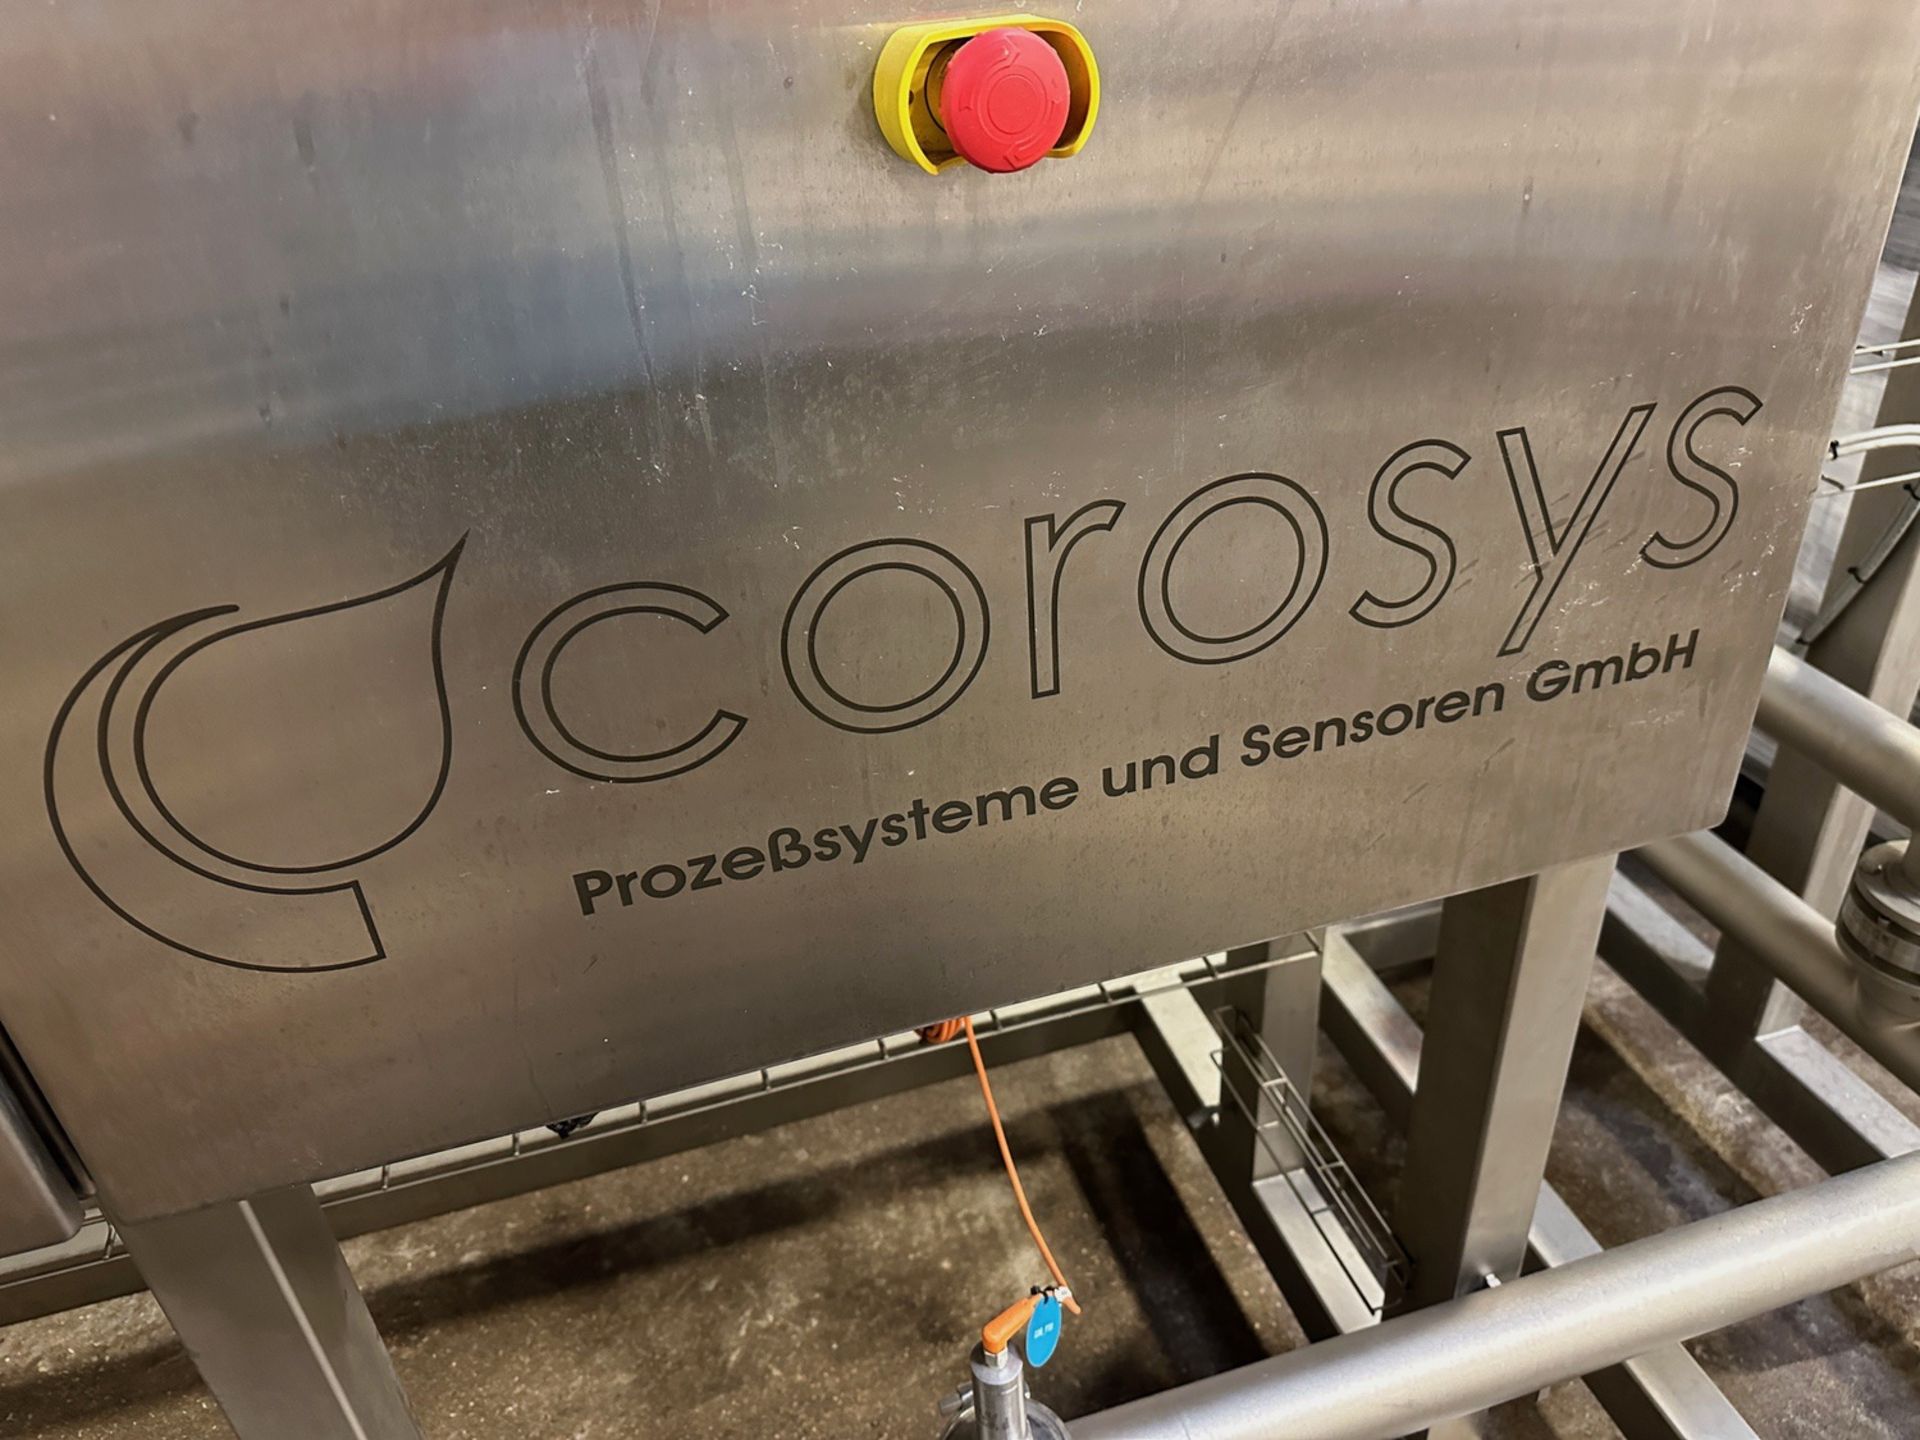 2016 Corosys BCS Blending &amp; Carbonation System, Anton Paar Carbo2100 MVE CO2 Transducer - Image 5 of 6